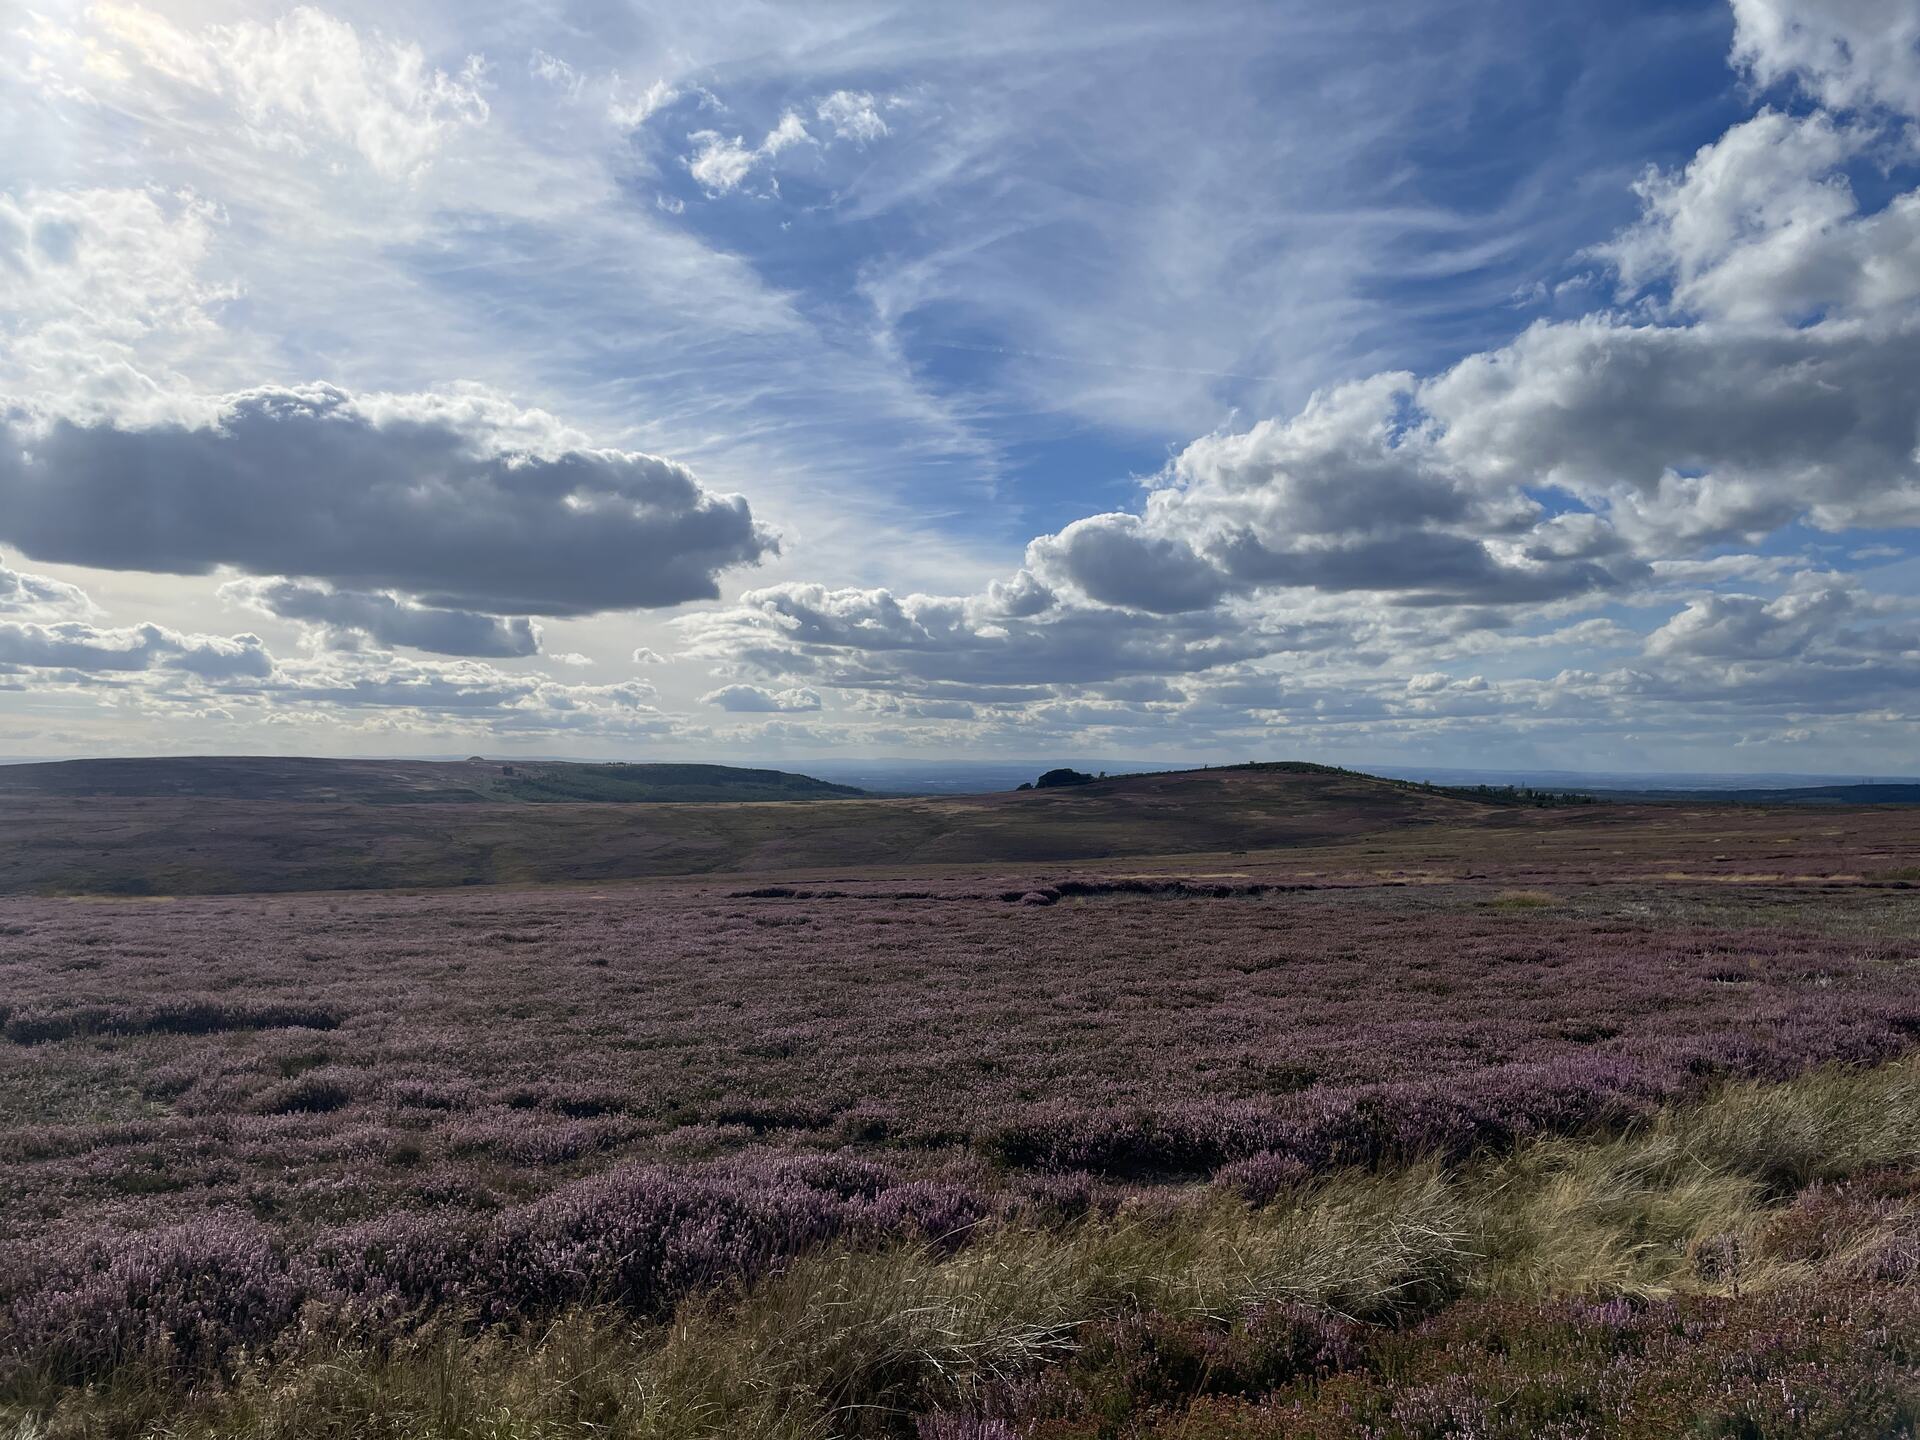 Heather out at Guisborough Moor; if you peer hard enough you can see the triple peaks of Great Dun Fell, Little Dun Fell, and Cross Fell, 100km away